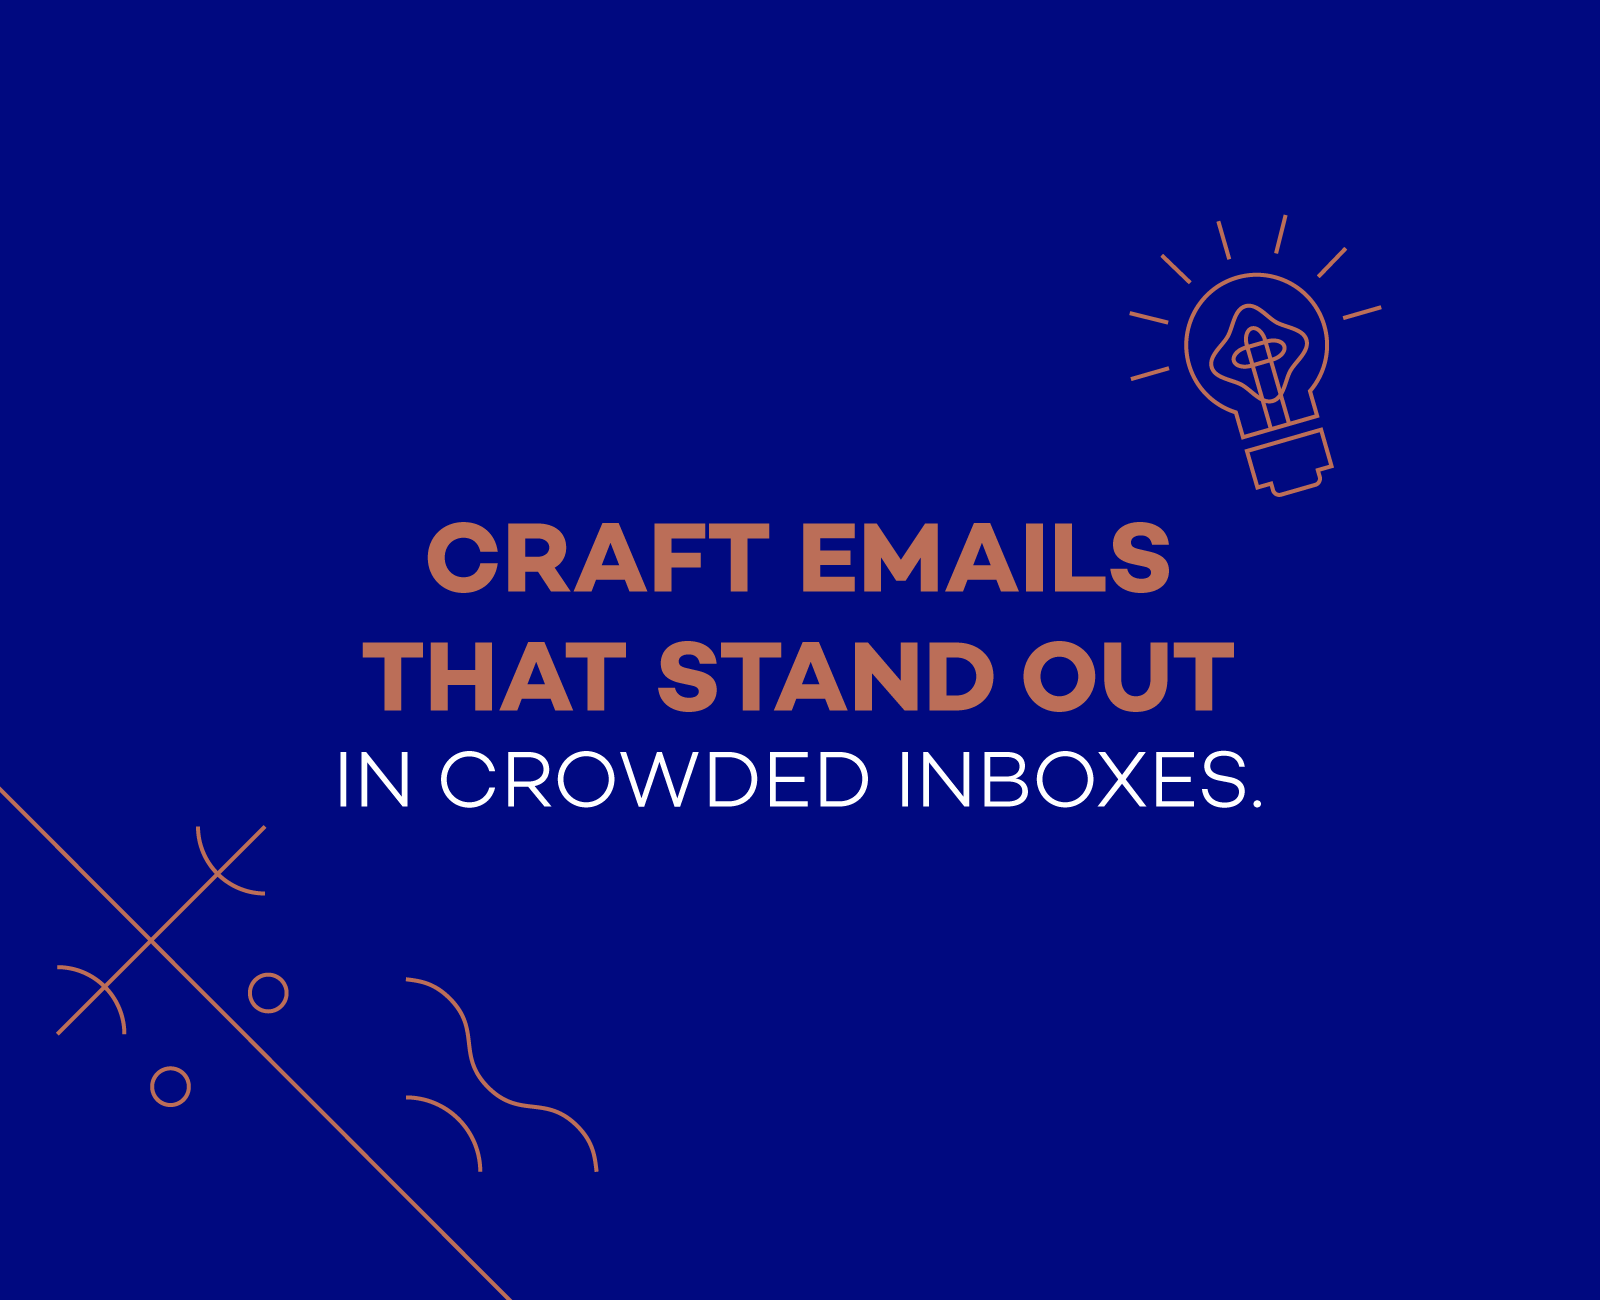 Craft emails that stand out in crowned inboxes